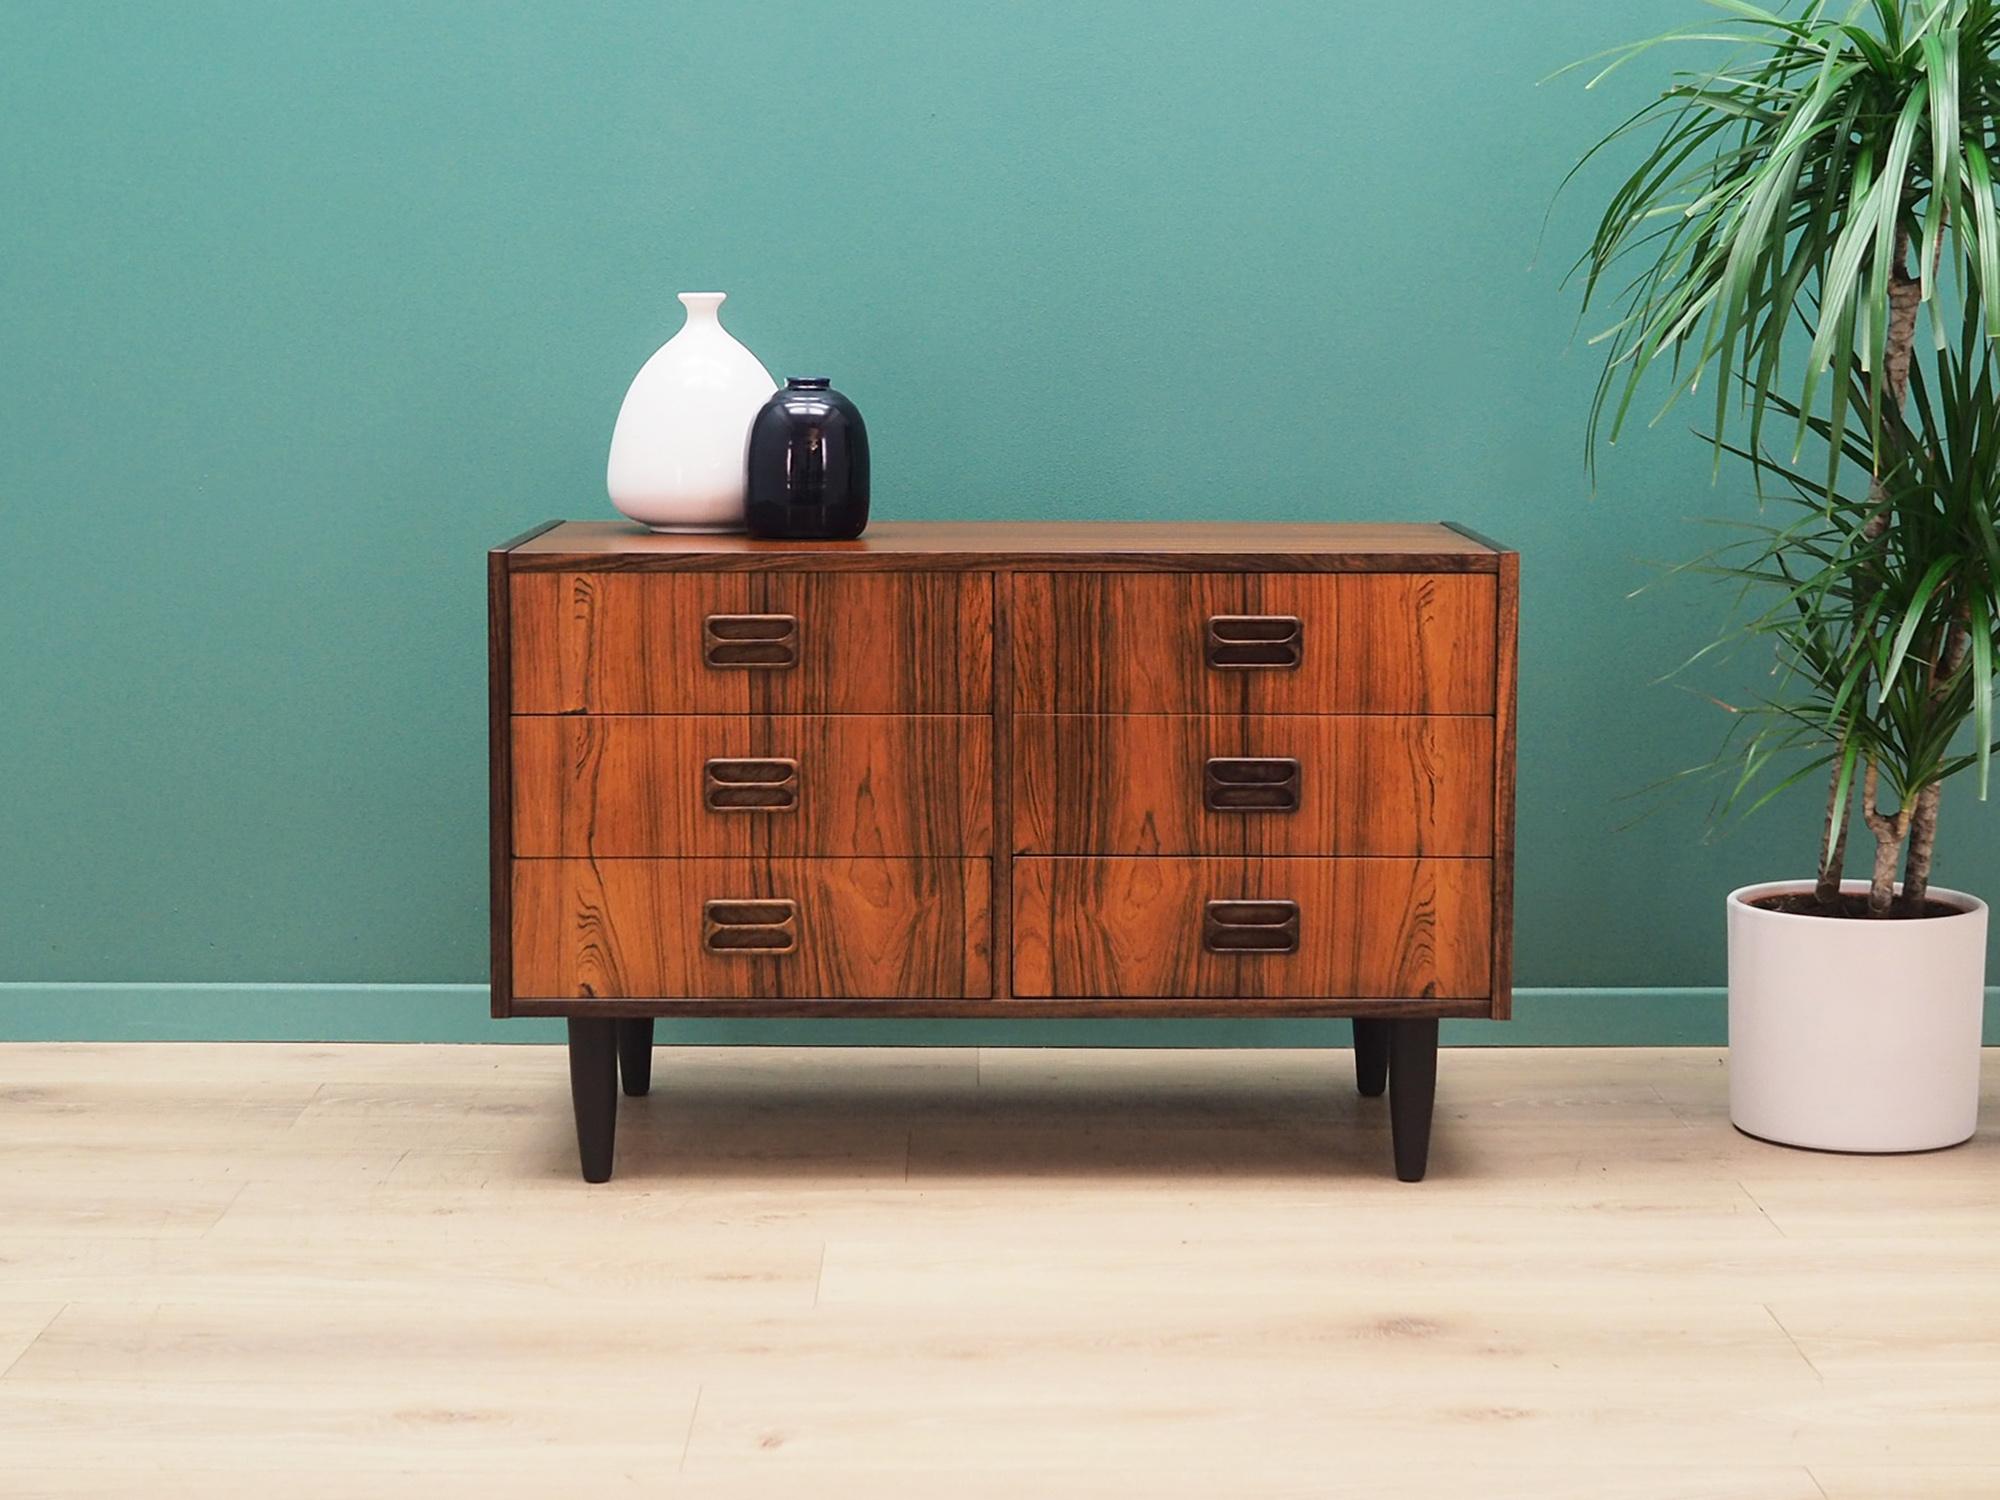 Chest of drawers was made in the 1970s and was designed by leading Danish designer Niels J. Thørso.

Structure is covered with rosewood veneer. Legs are made of solid wood and stained black. Surface after refreshing. This piece of furniture is a